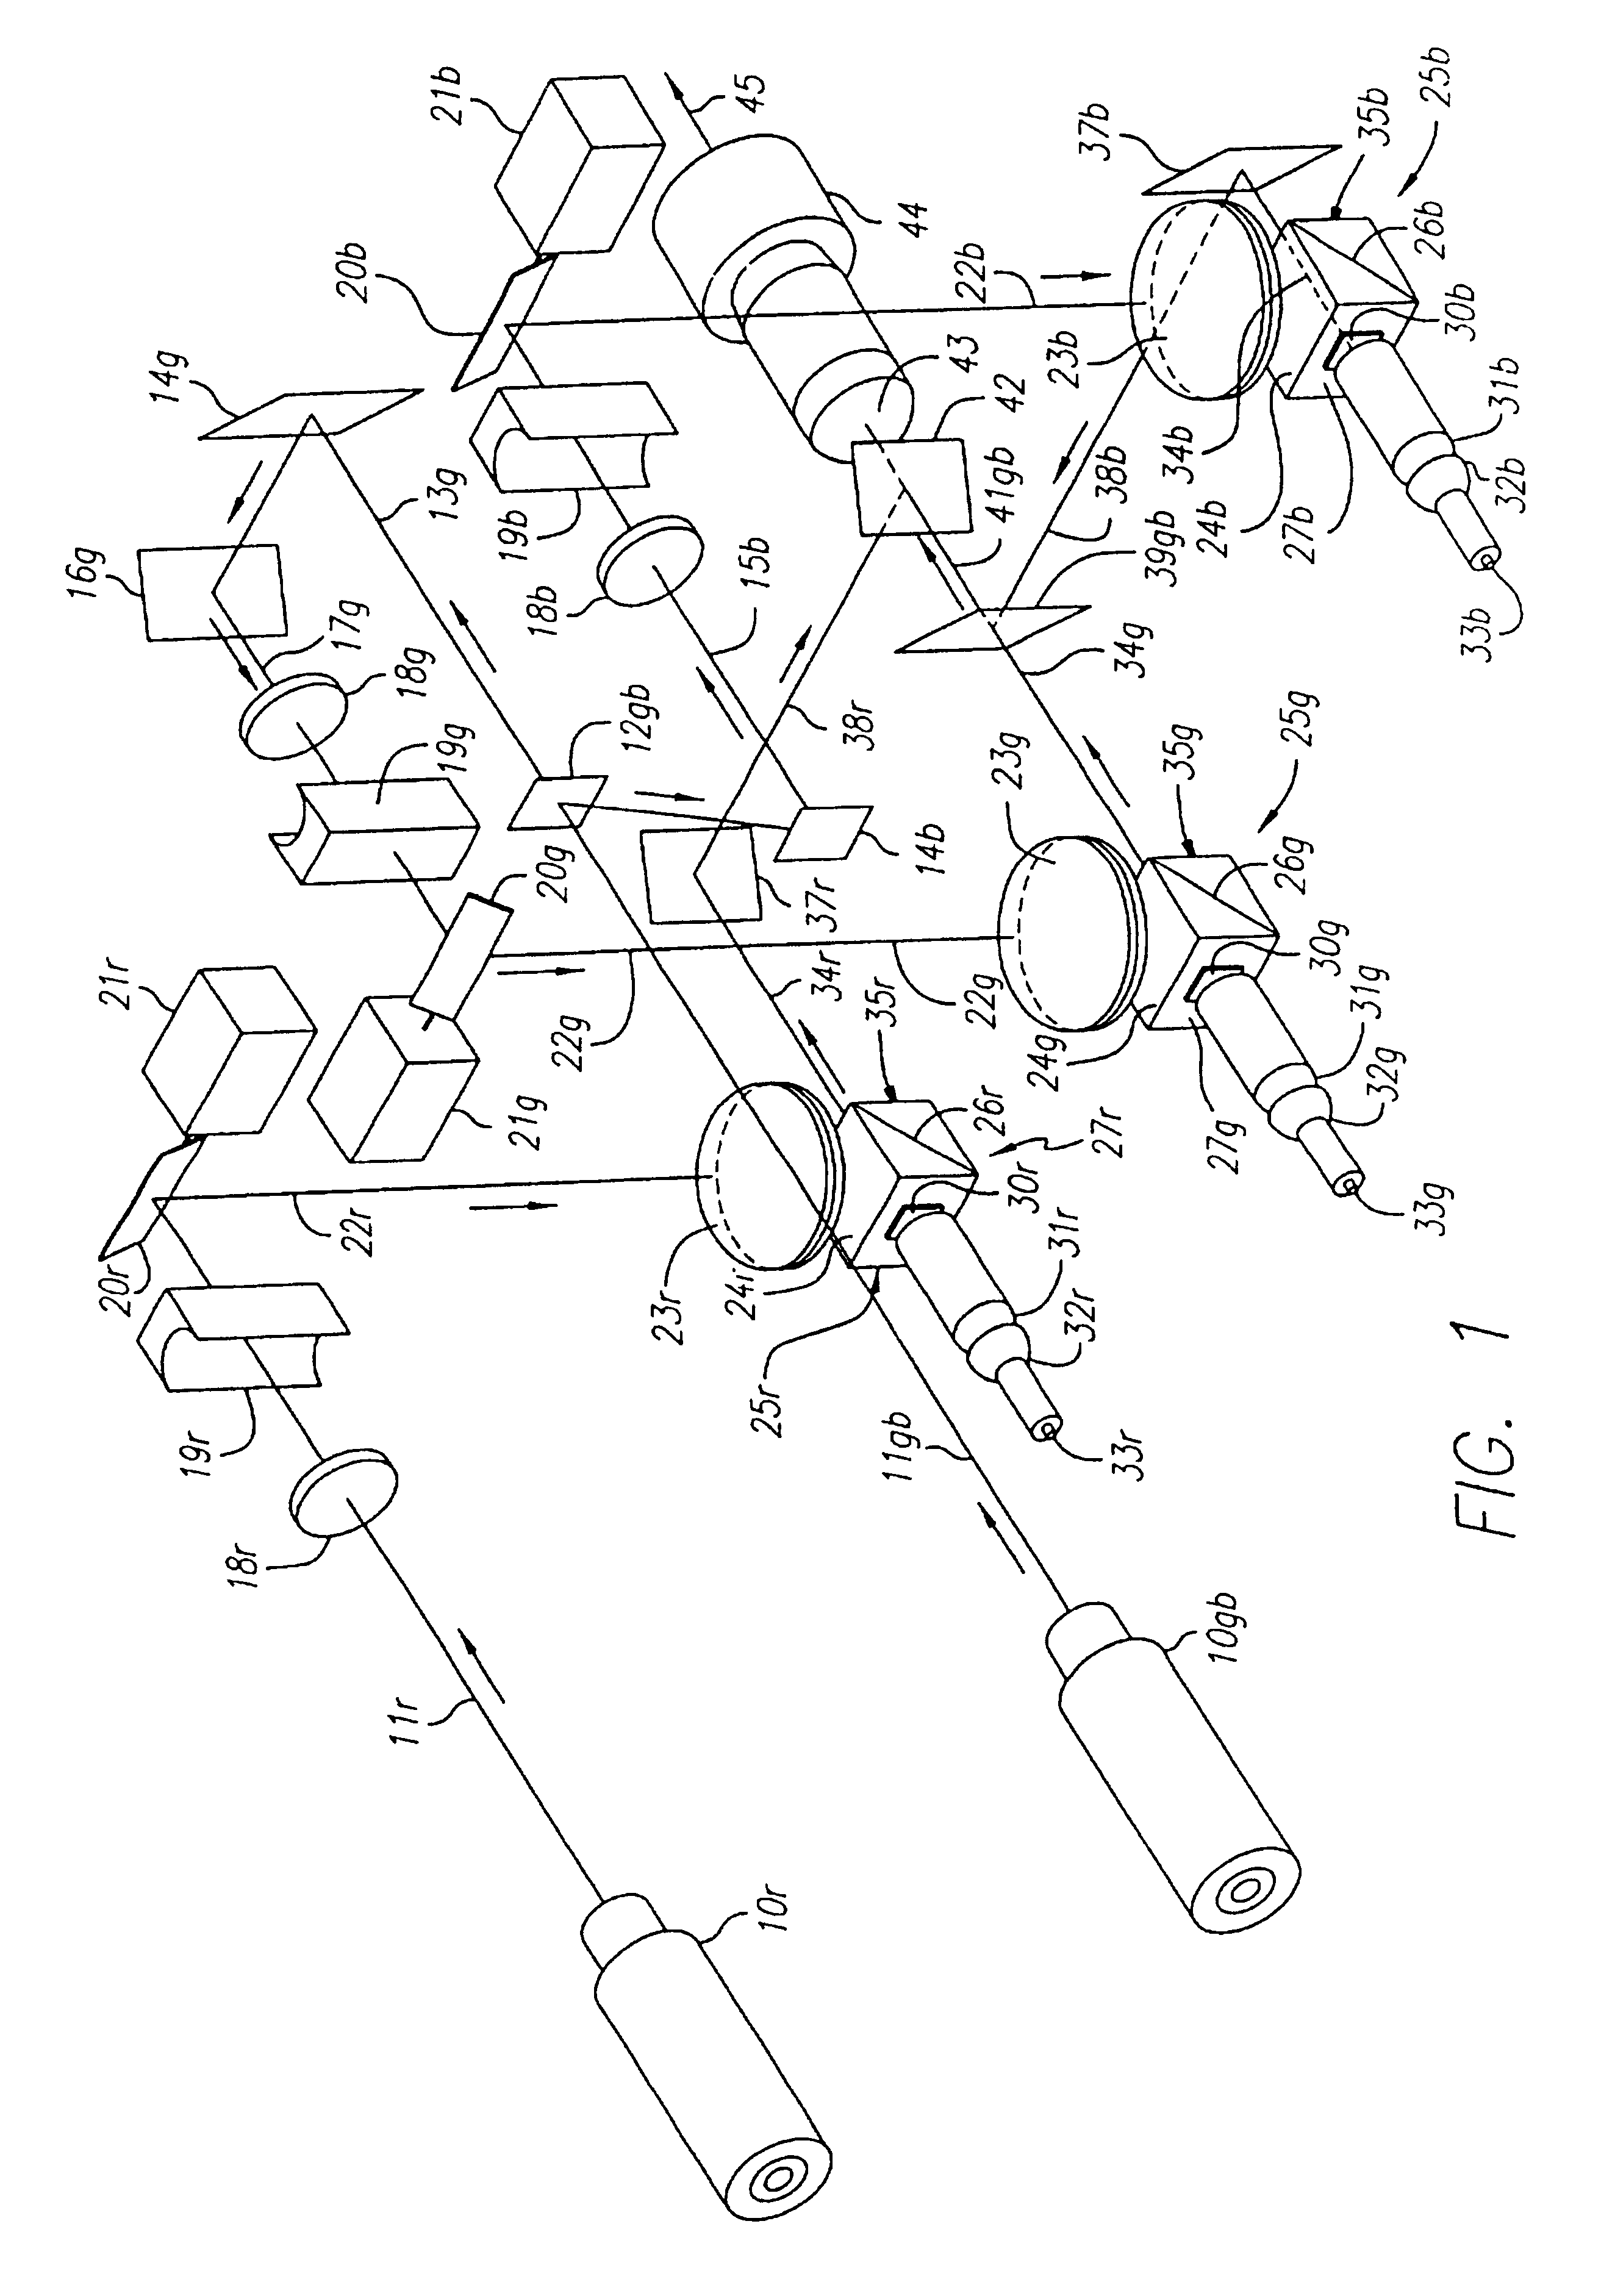 Laser projection apparatus with liquid-crystal light valves and scanning reading beam